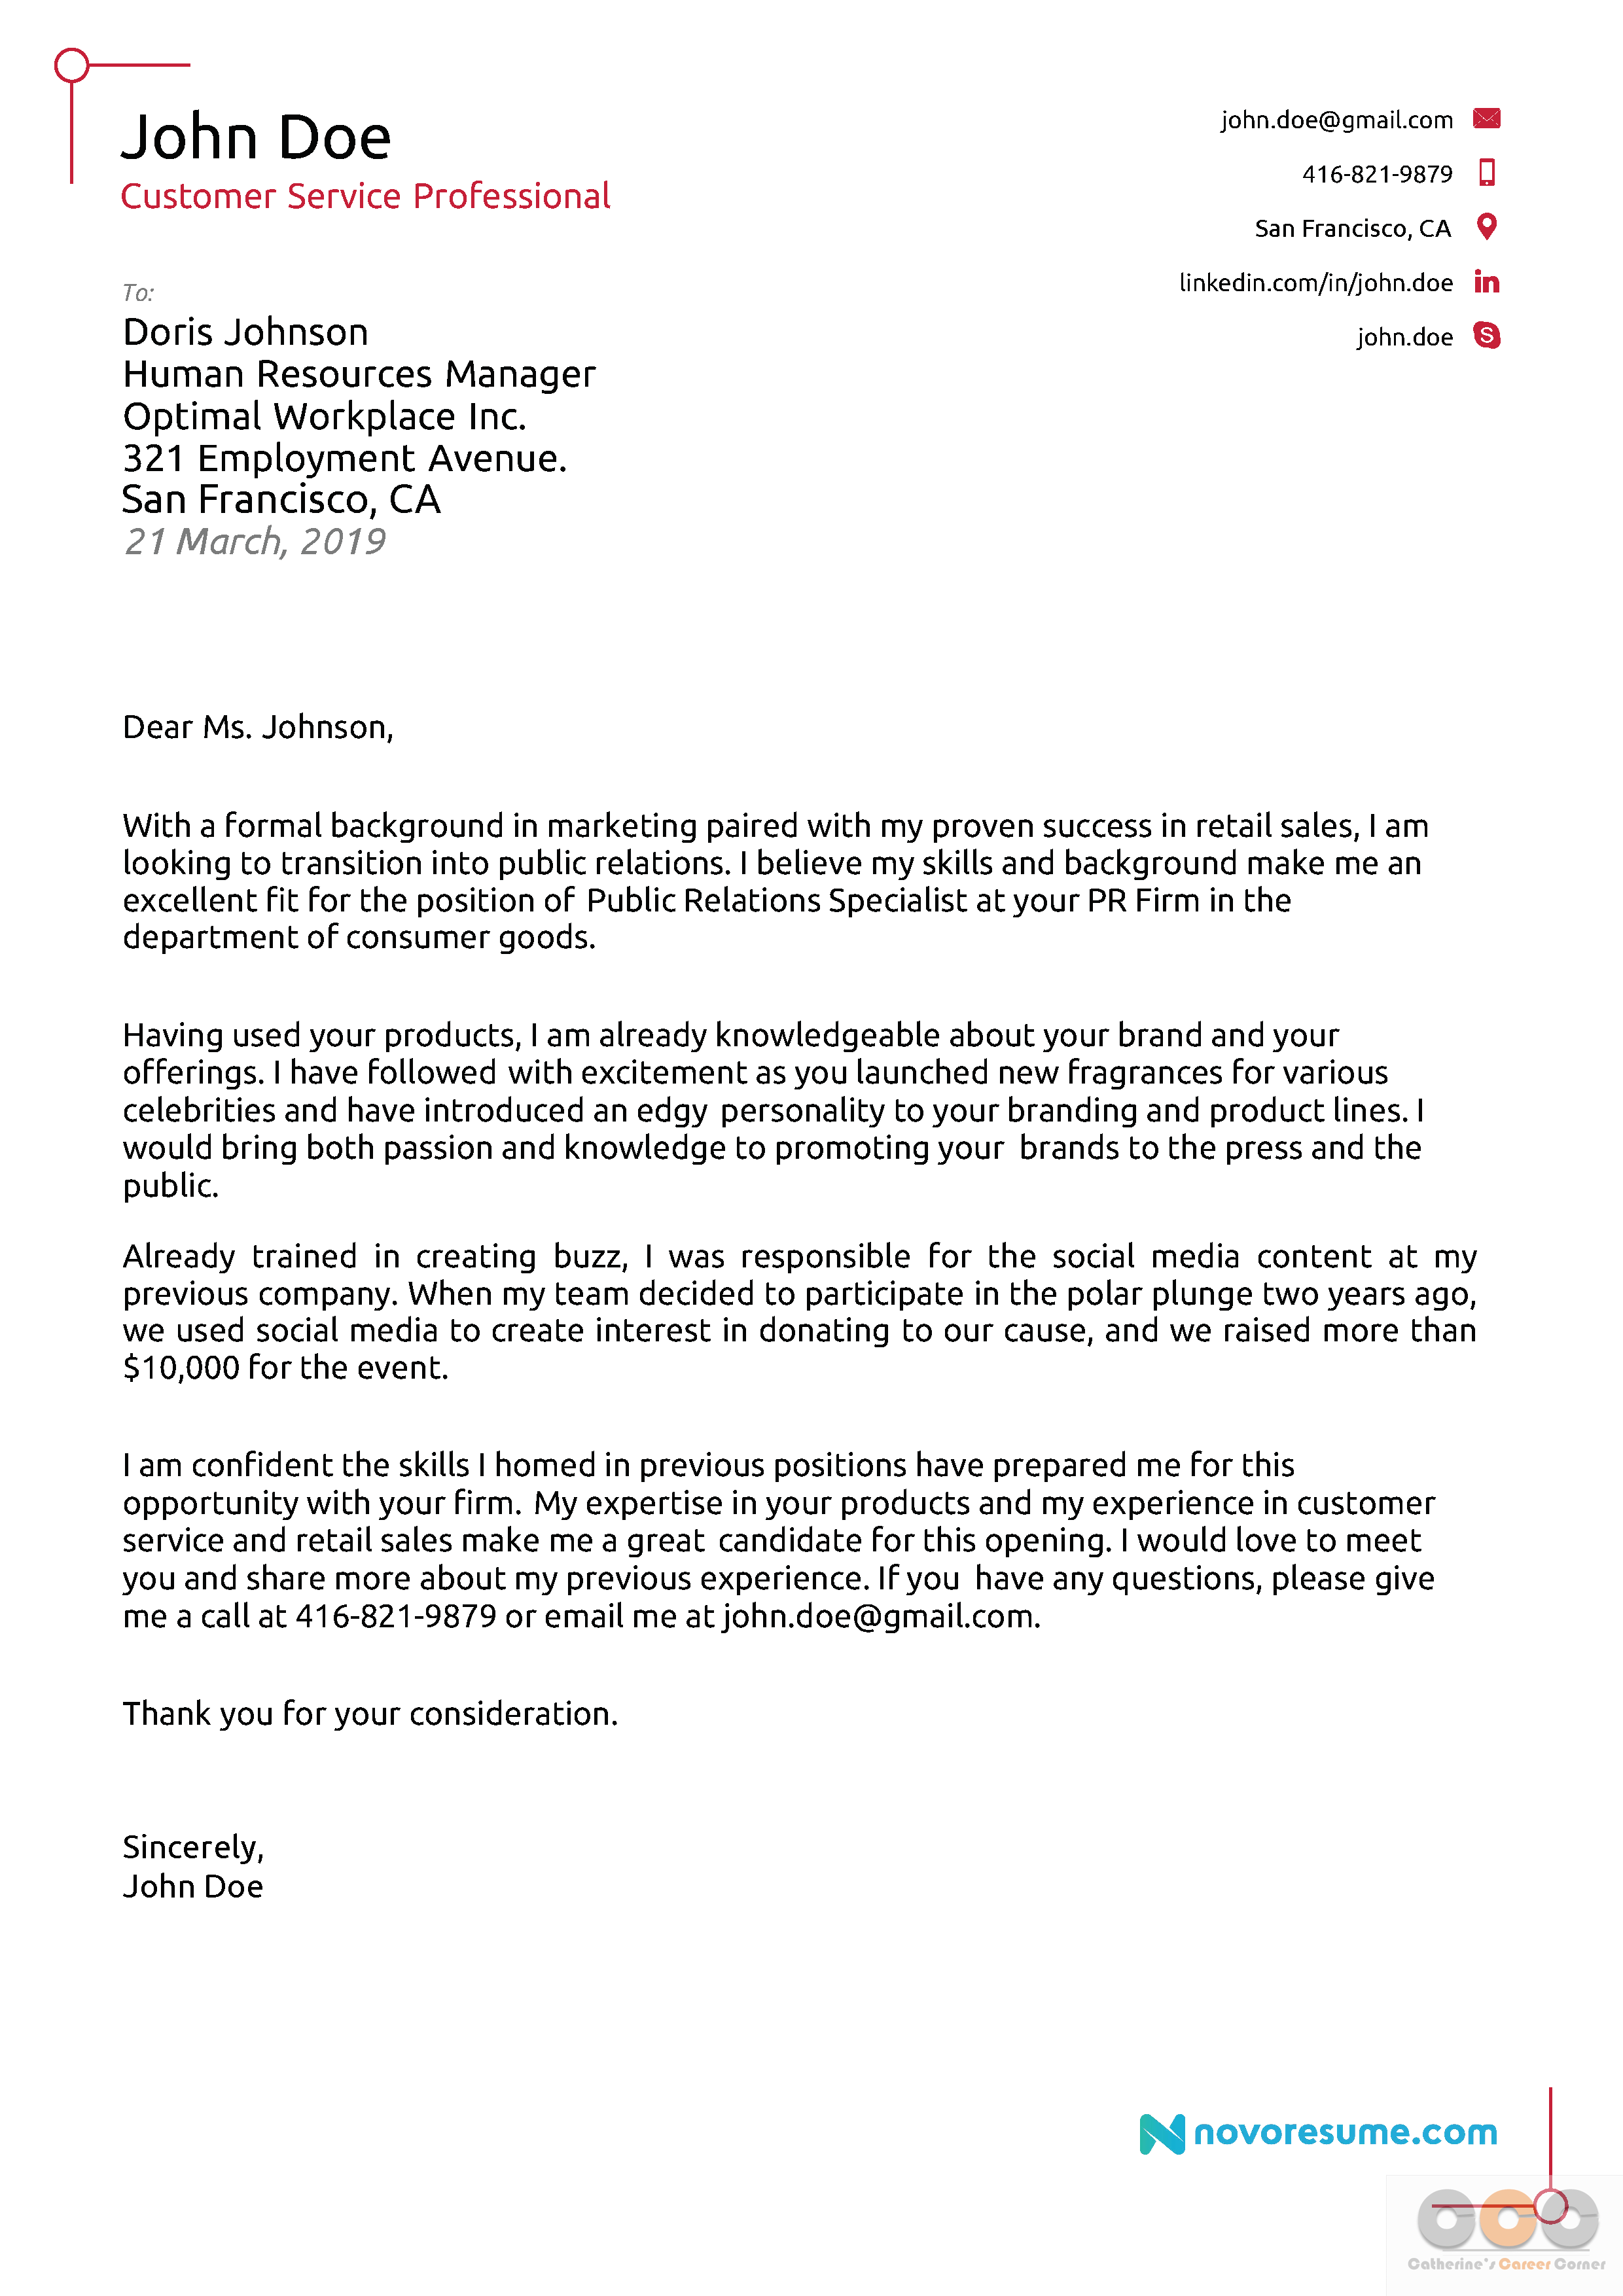 Targeted Cover Letter Examples from catherinescareercorner.com